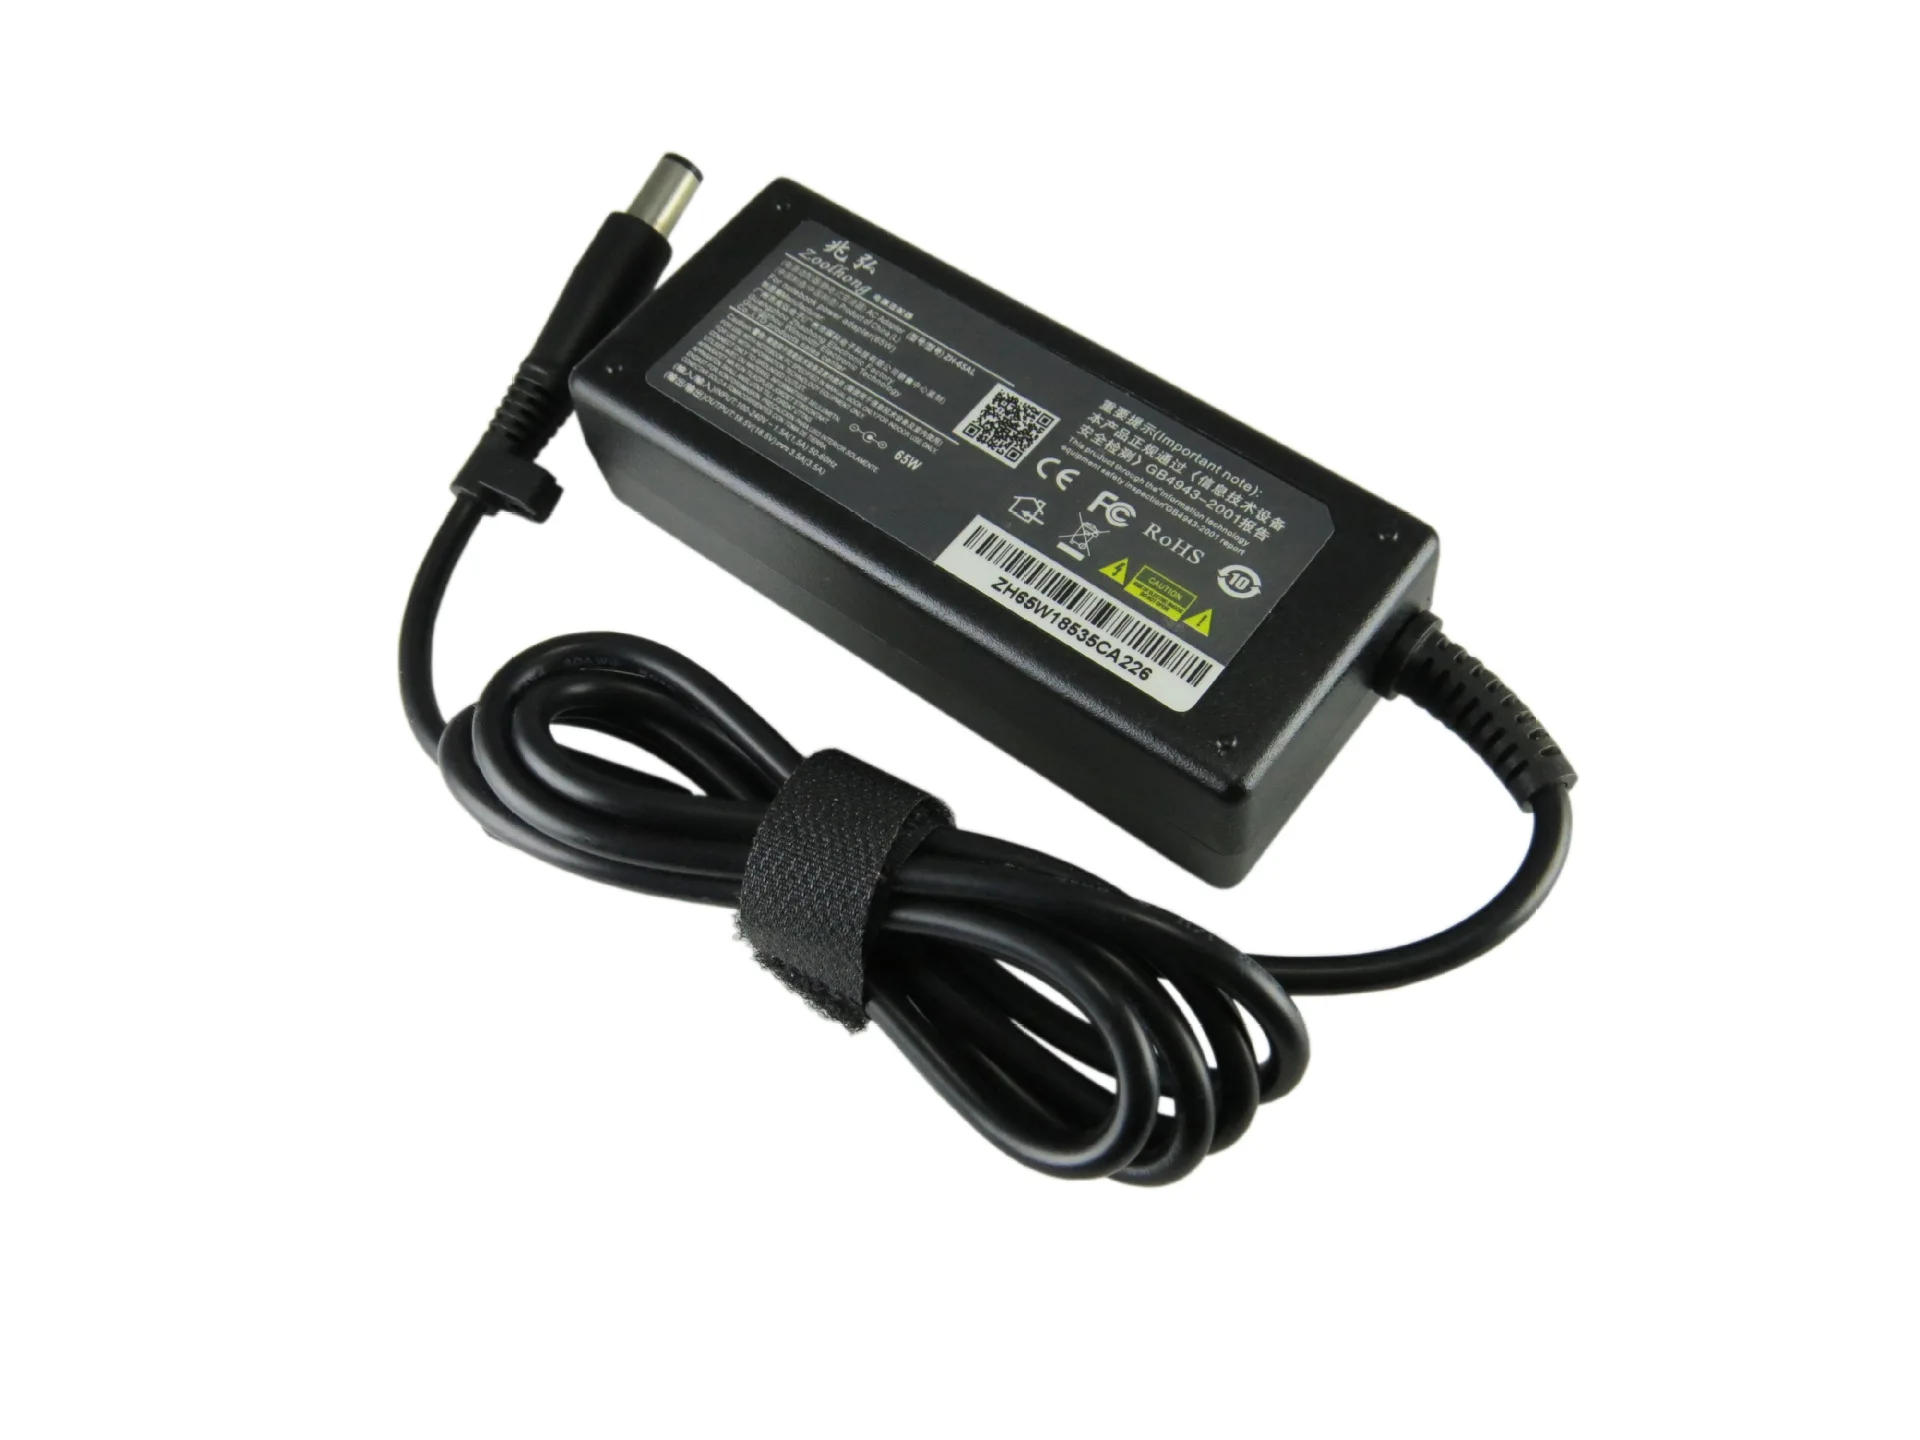 

18.5V 3.5A 65W laptop AC power adapter charger for HP laptop 463958-001 NC6320 DV5 DV6 DV7 big mouth with needles